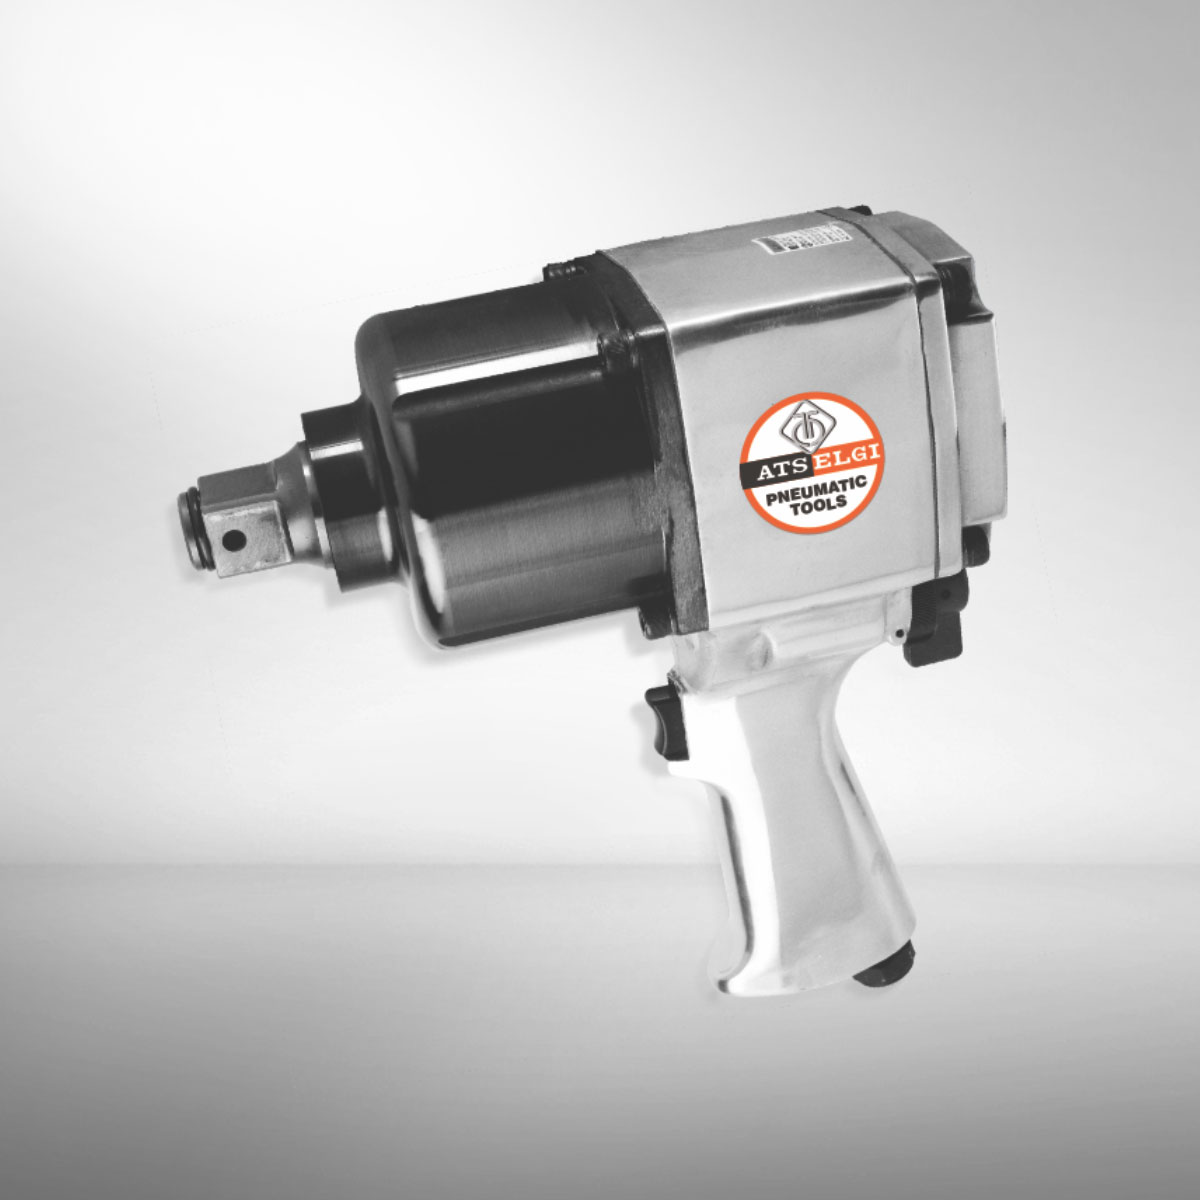 3/4″ Impact Wrench